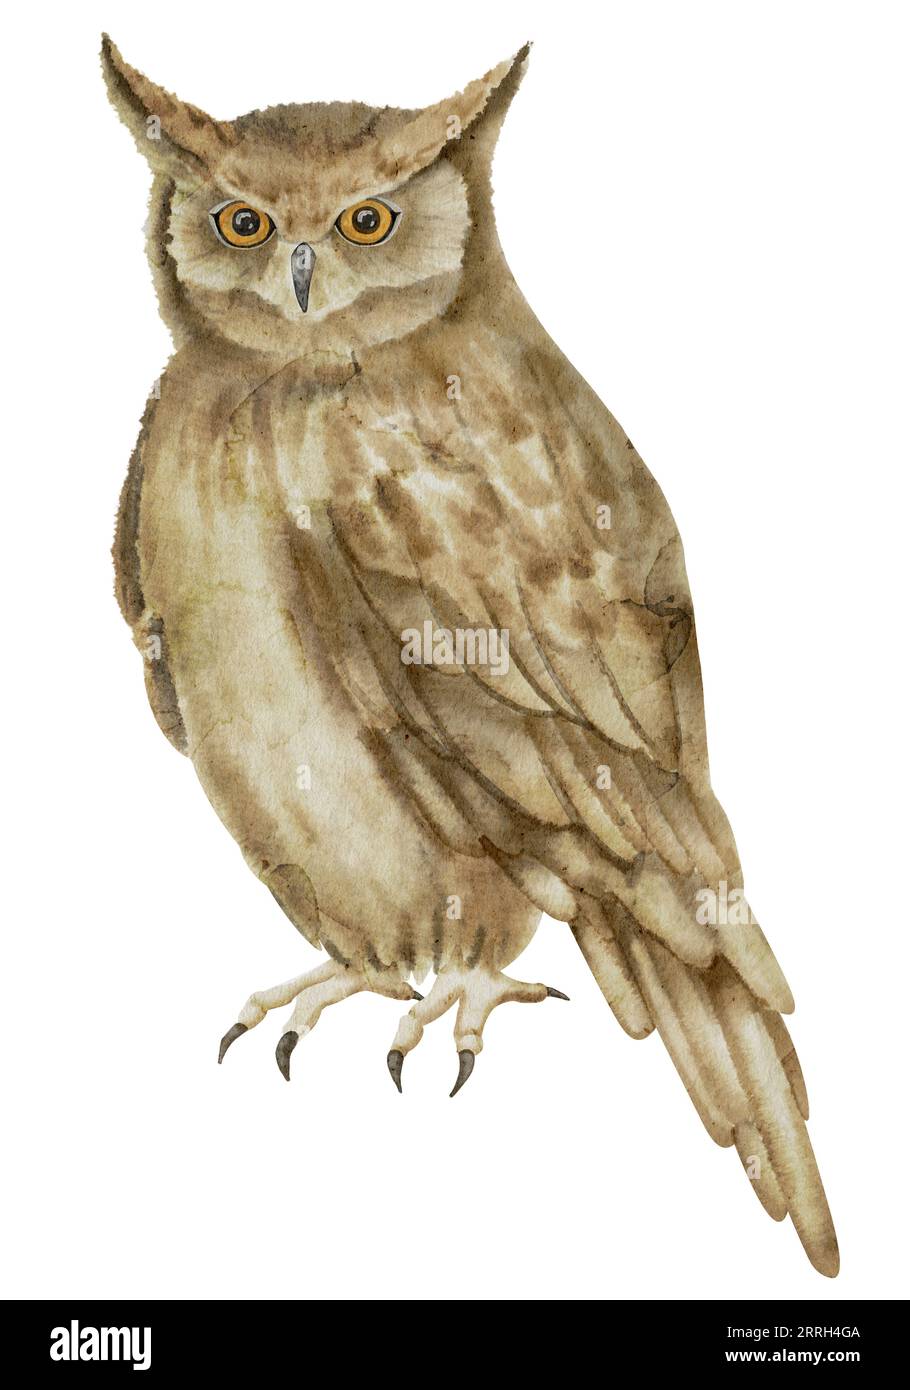 Horned Owl on isolated background. Watercolor illustration of a sitting night Bird. Hand drawn clip art of a forest Animal with brown wings. Drawing of owlet. Symbol of wisdom in fairy tales. Stock Photo